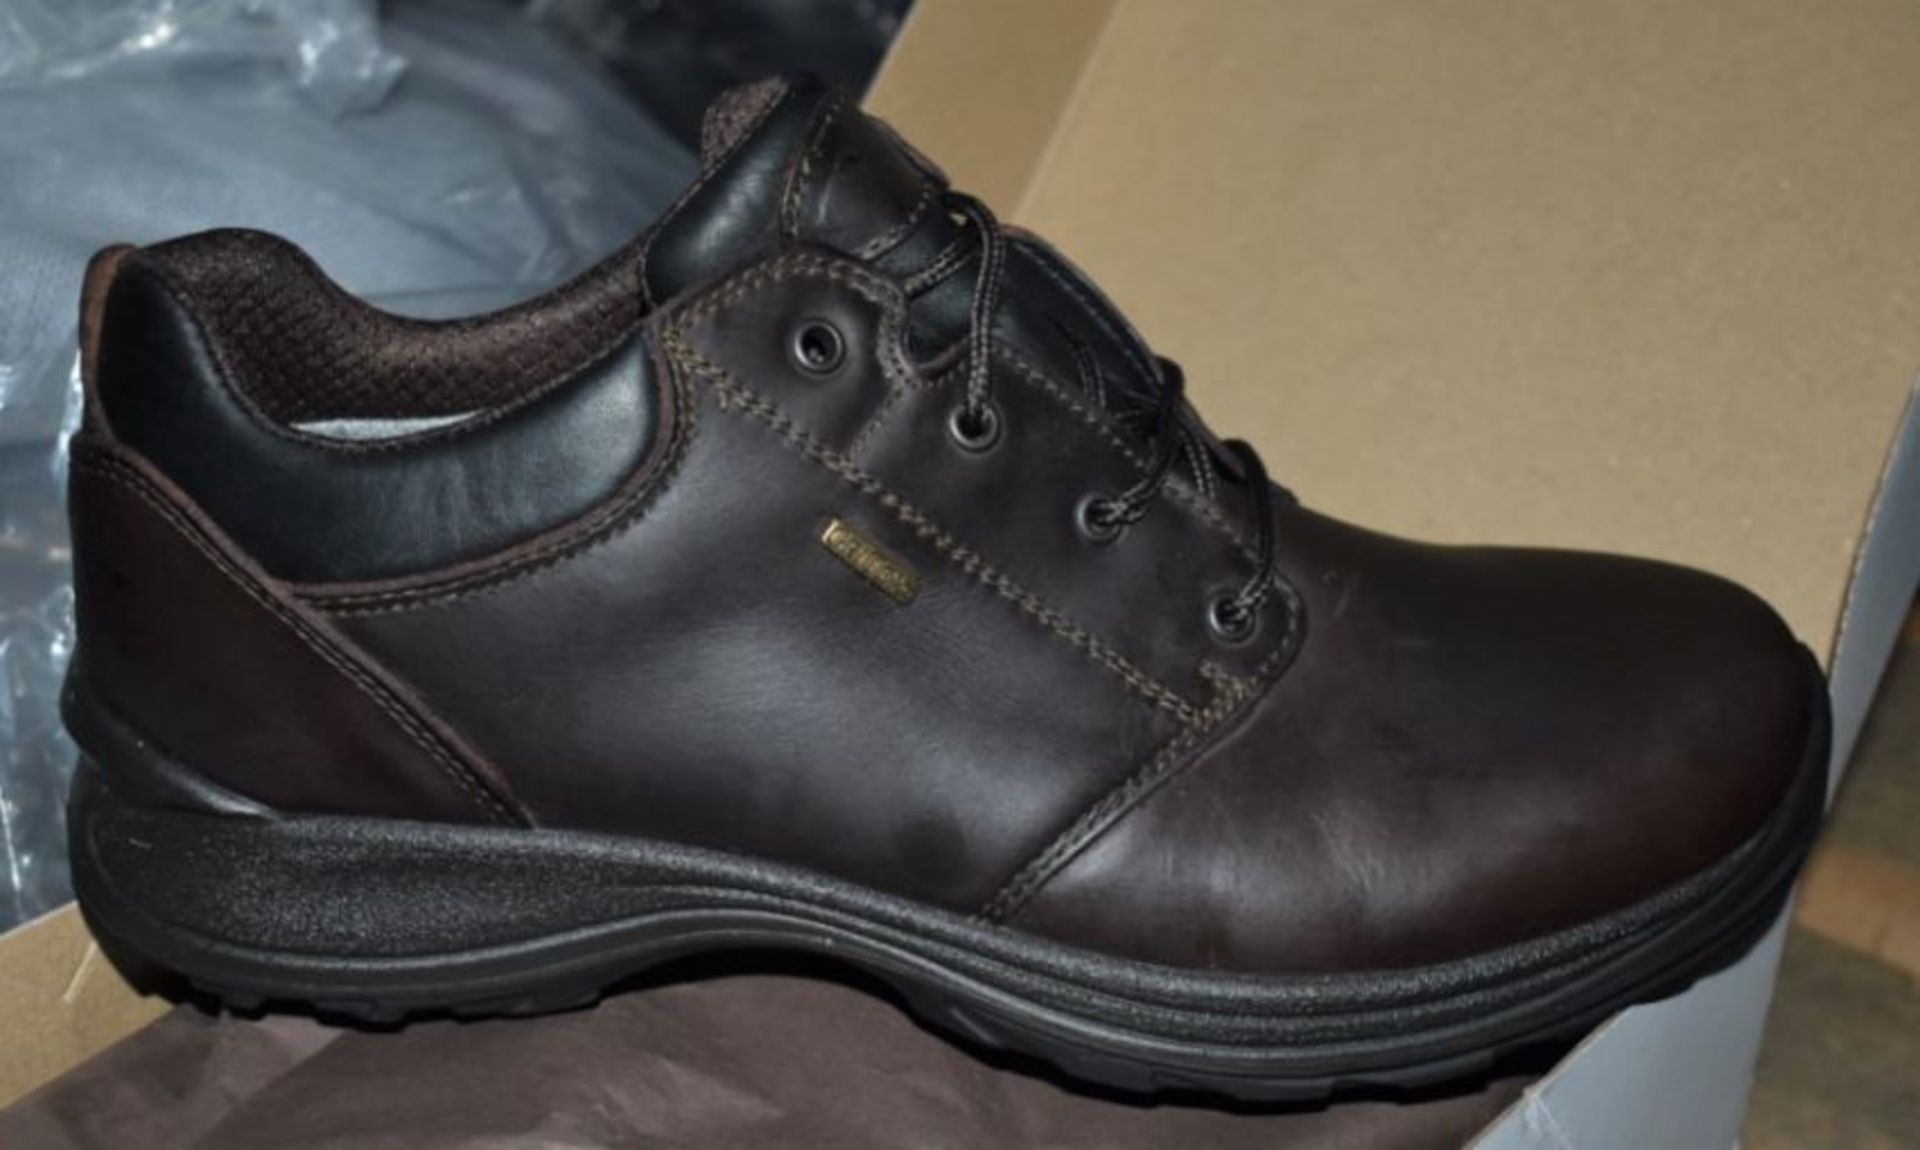 1 x Pair of Men's Grisport Brown Leather GriTex Shoes - Rogerson Footwear - Brand New and Boxed - - Image 7 of 8